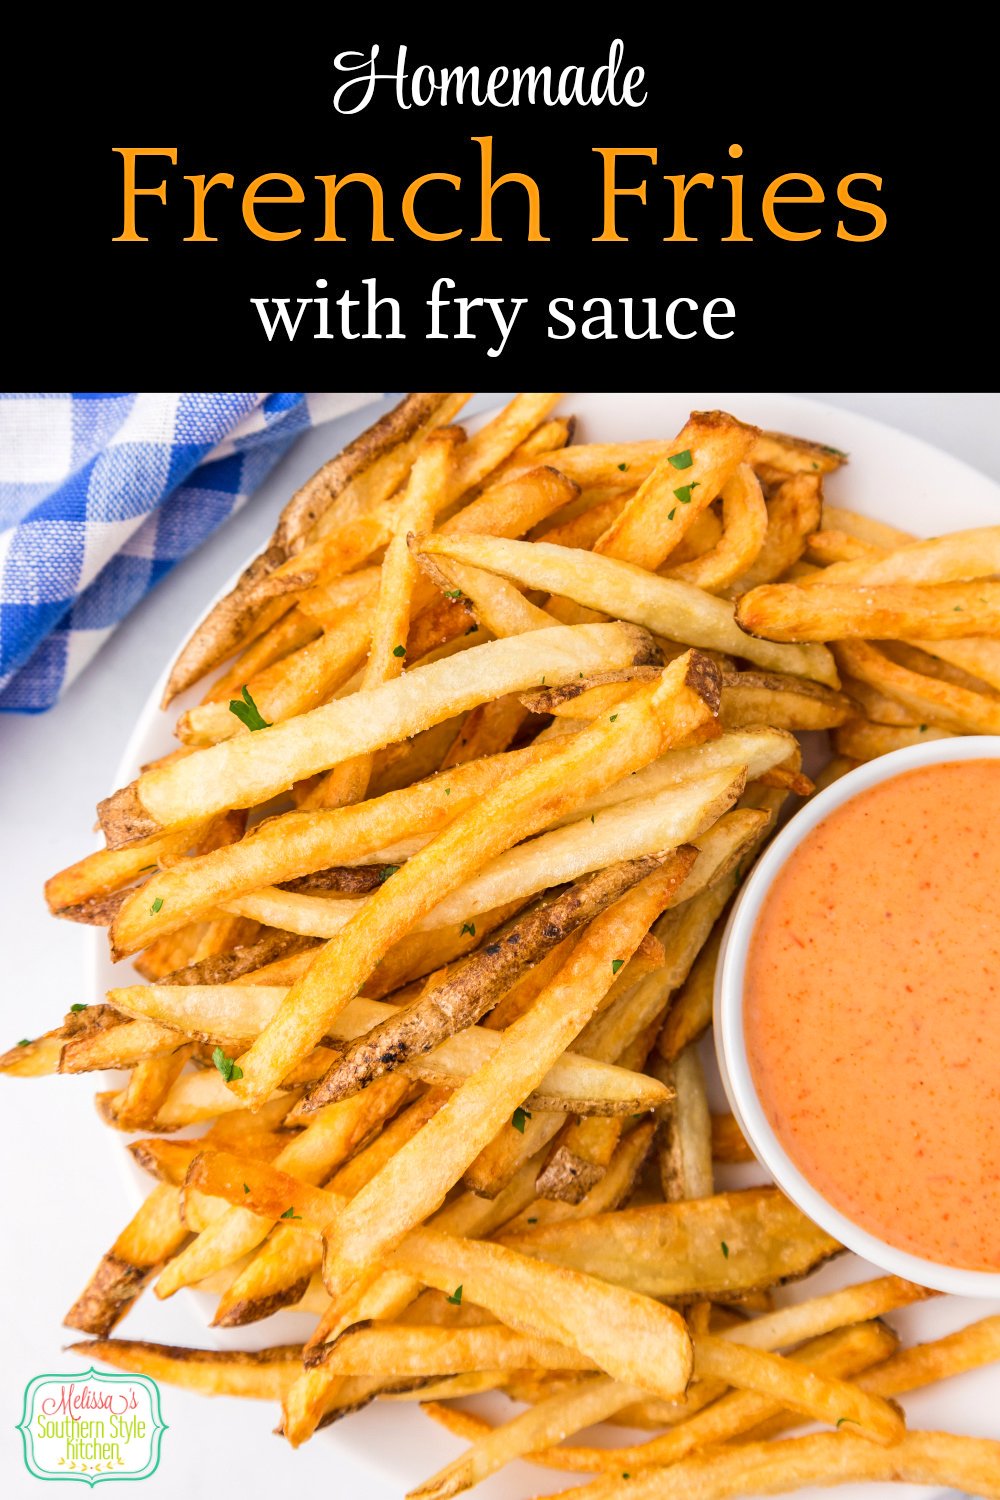 Homemade French Fries are a can't-miss side dish you can make at home. #frenchfries #homemadefrenchfries #easyfrenchfries #frenchfriesrecipe #potatorecipes #potatoes #fries #russetpotatoes #russetpotatorecipes